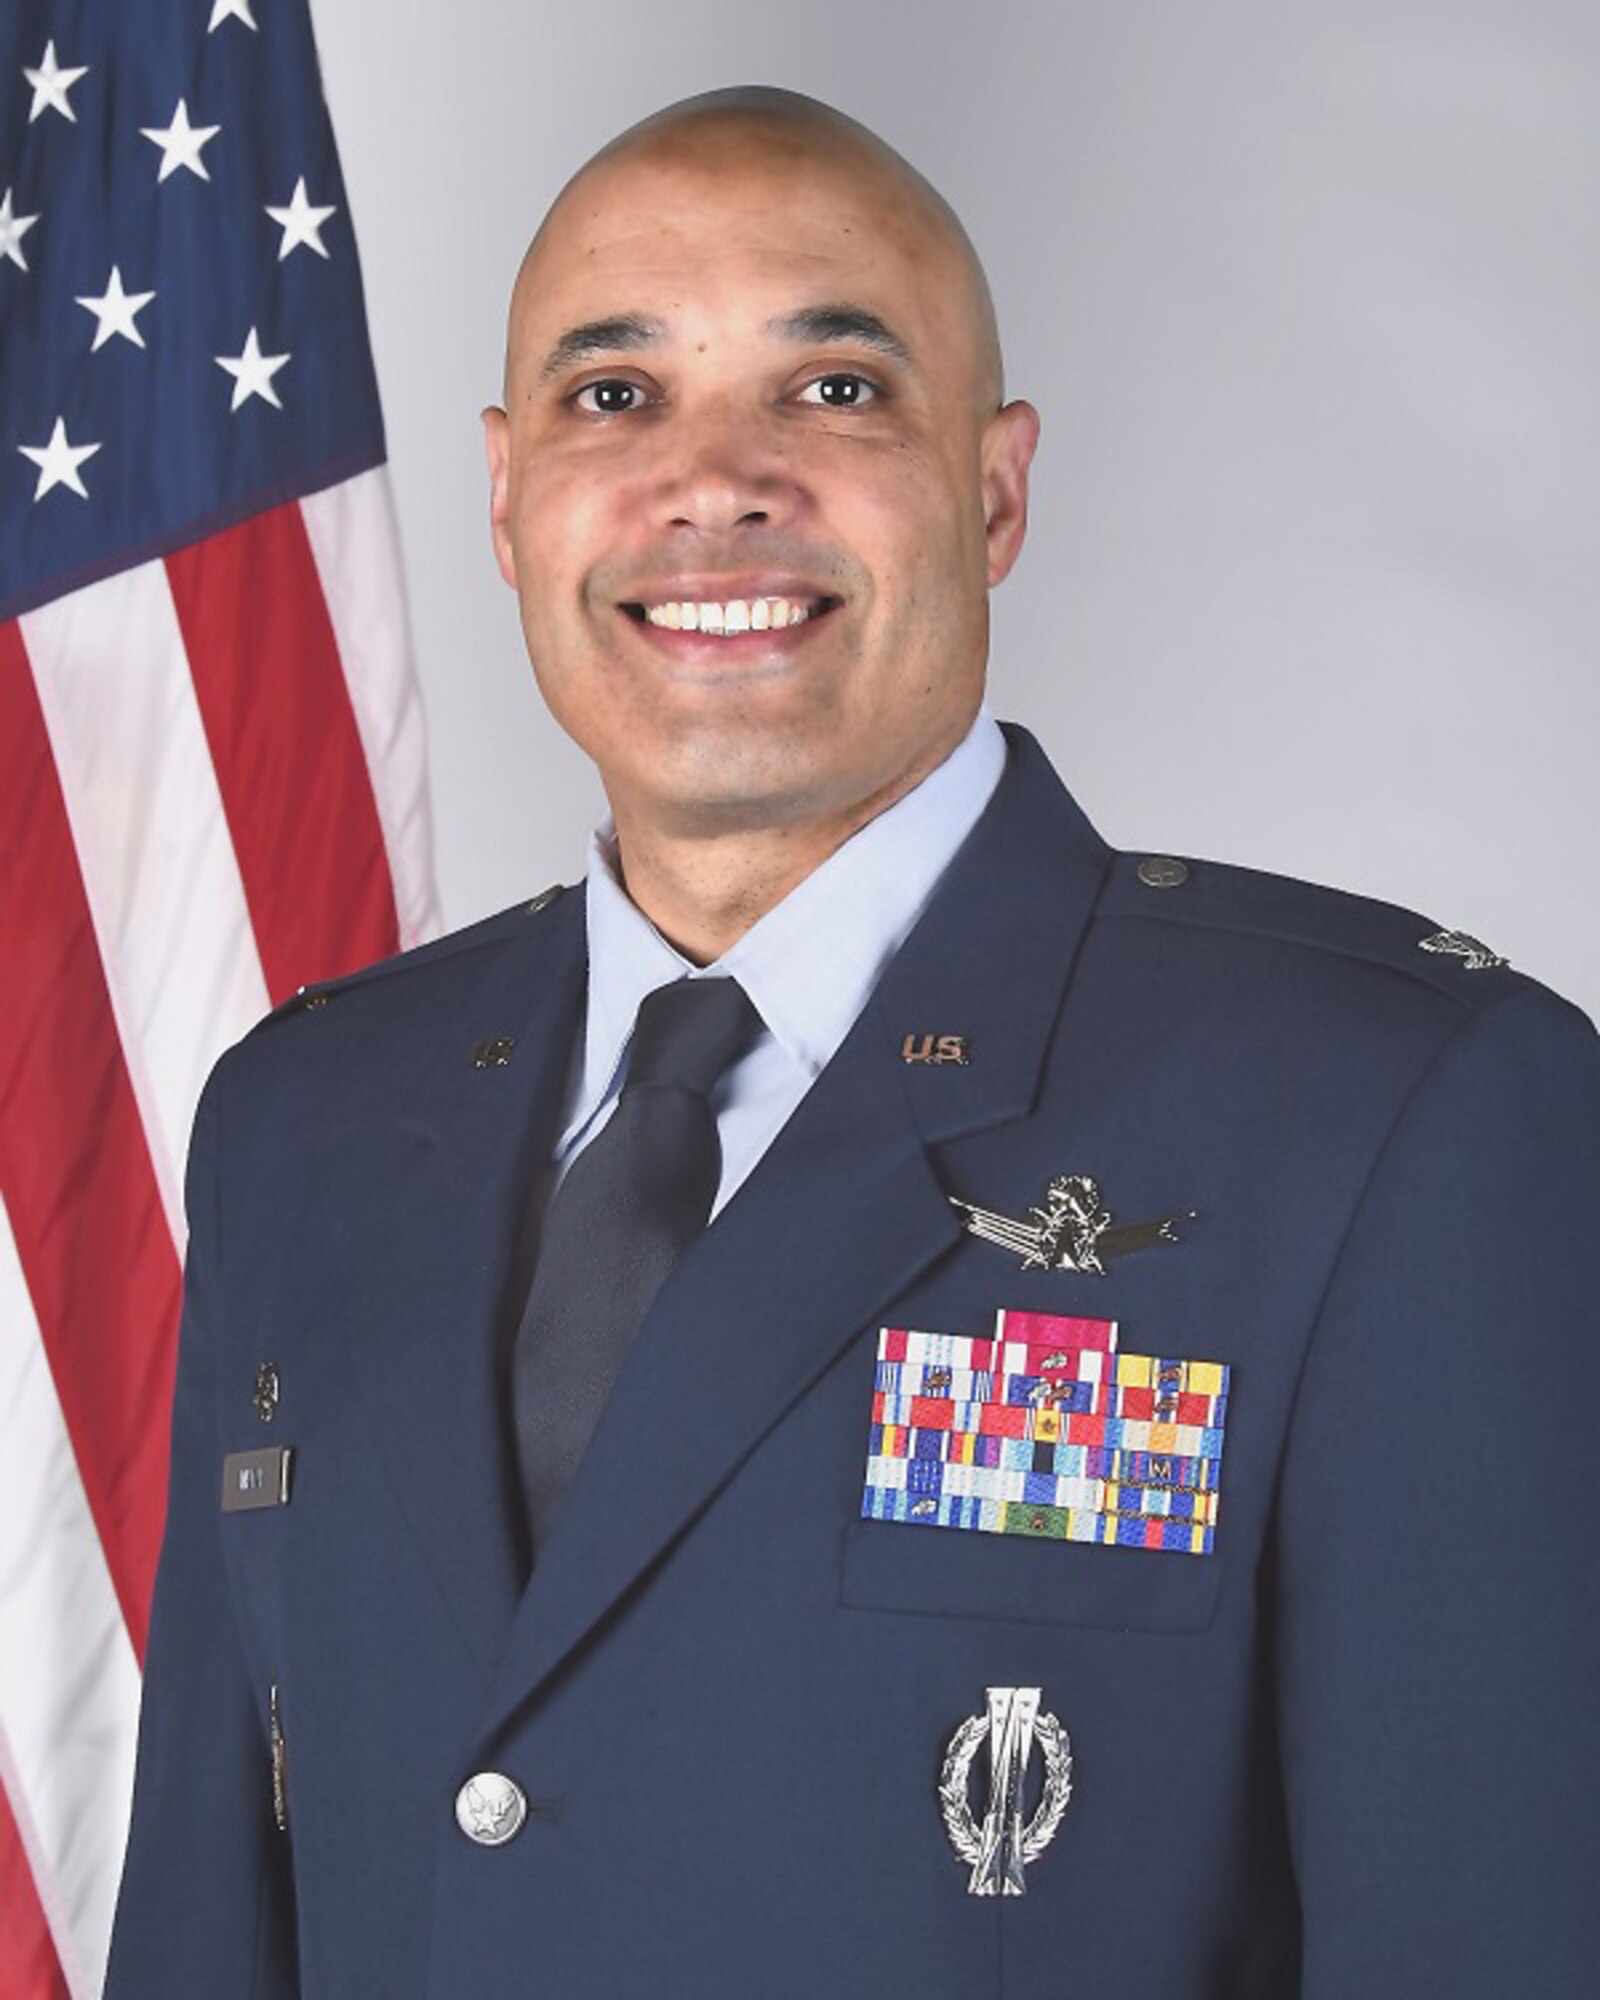 Col. David N. Miller Jr. assumed command of the 460th Space Wing during a change-of-command ceremony Aug. 12, 2016, on Buckley Air Force Base, Colo. Since then, Miller continues to guide Team Buckley to a path of success through his top priorities of professionalism, discipline and readiness. (U.S. Air Force photo by Senior Airman Samantha Meadors/ Released)